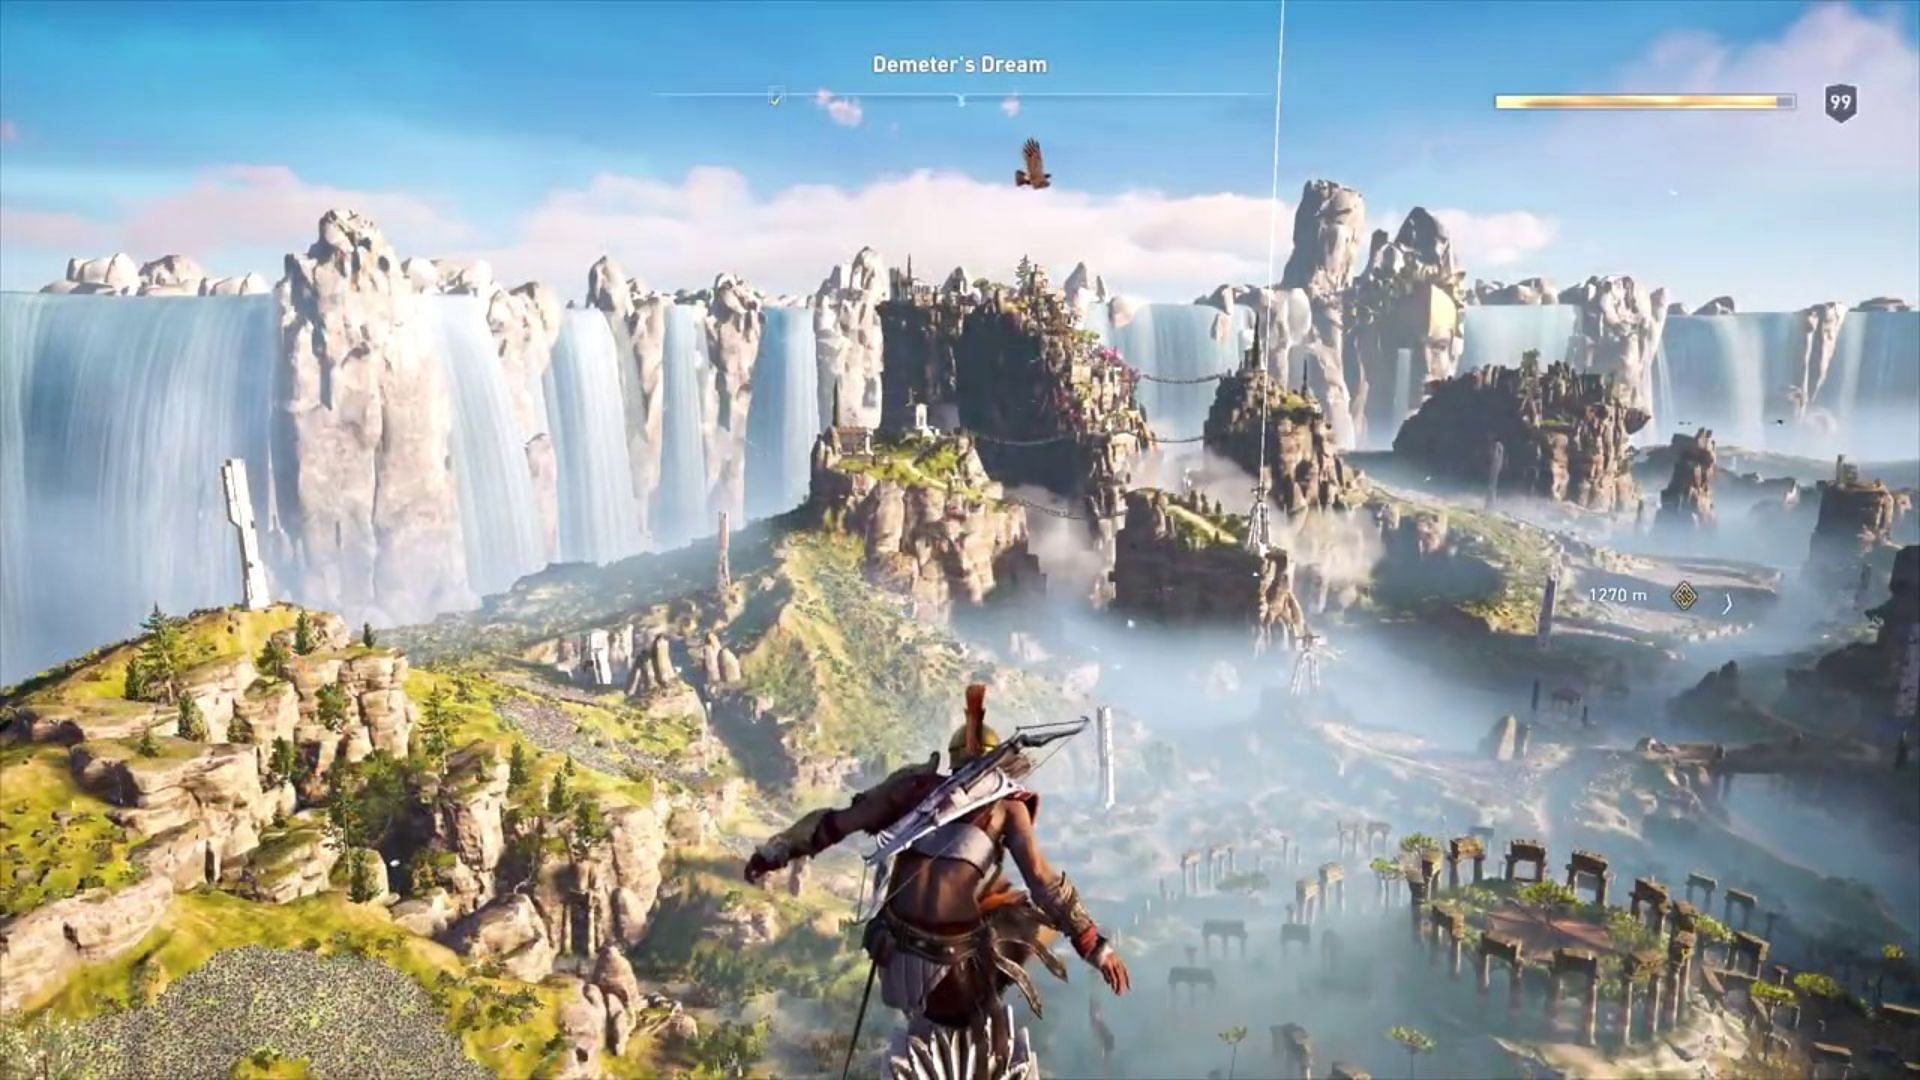 modularity would let Ubisoft build a seamless Open World (Image by Ubisoft)